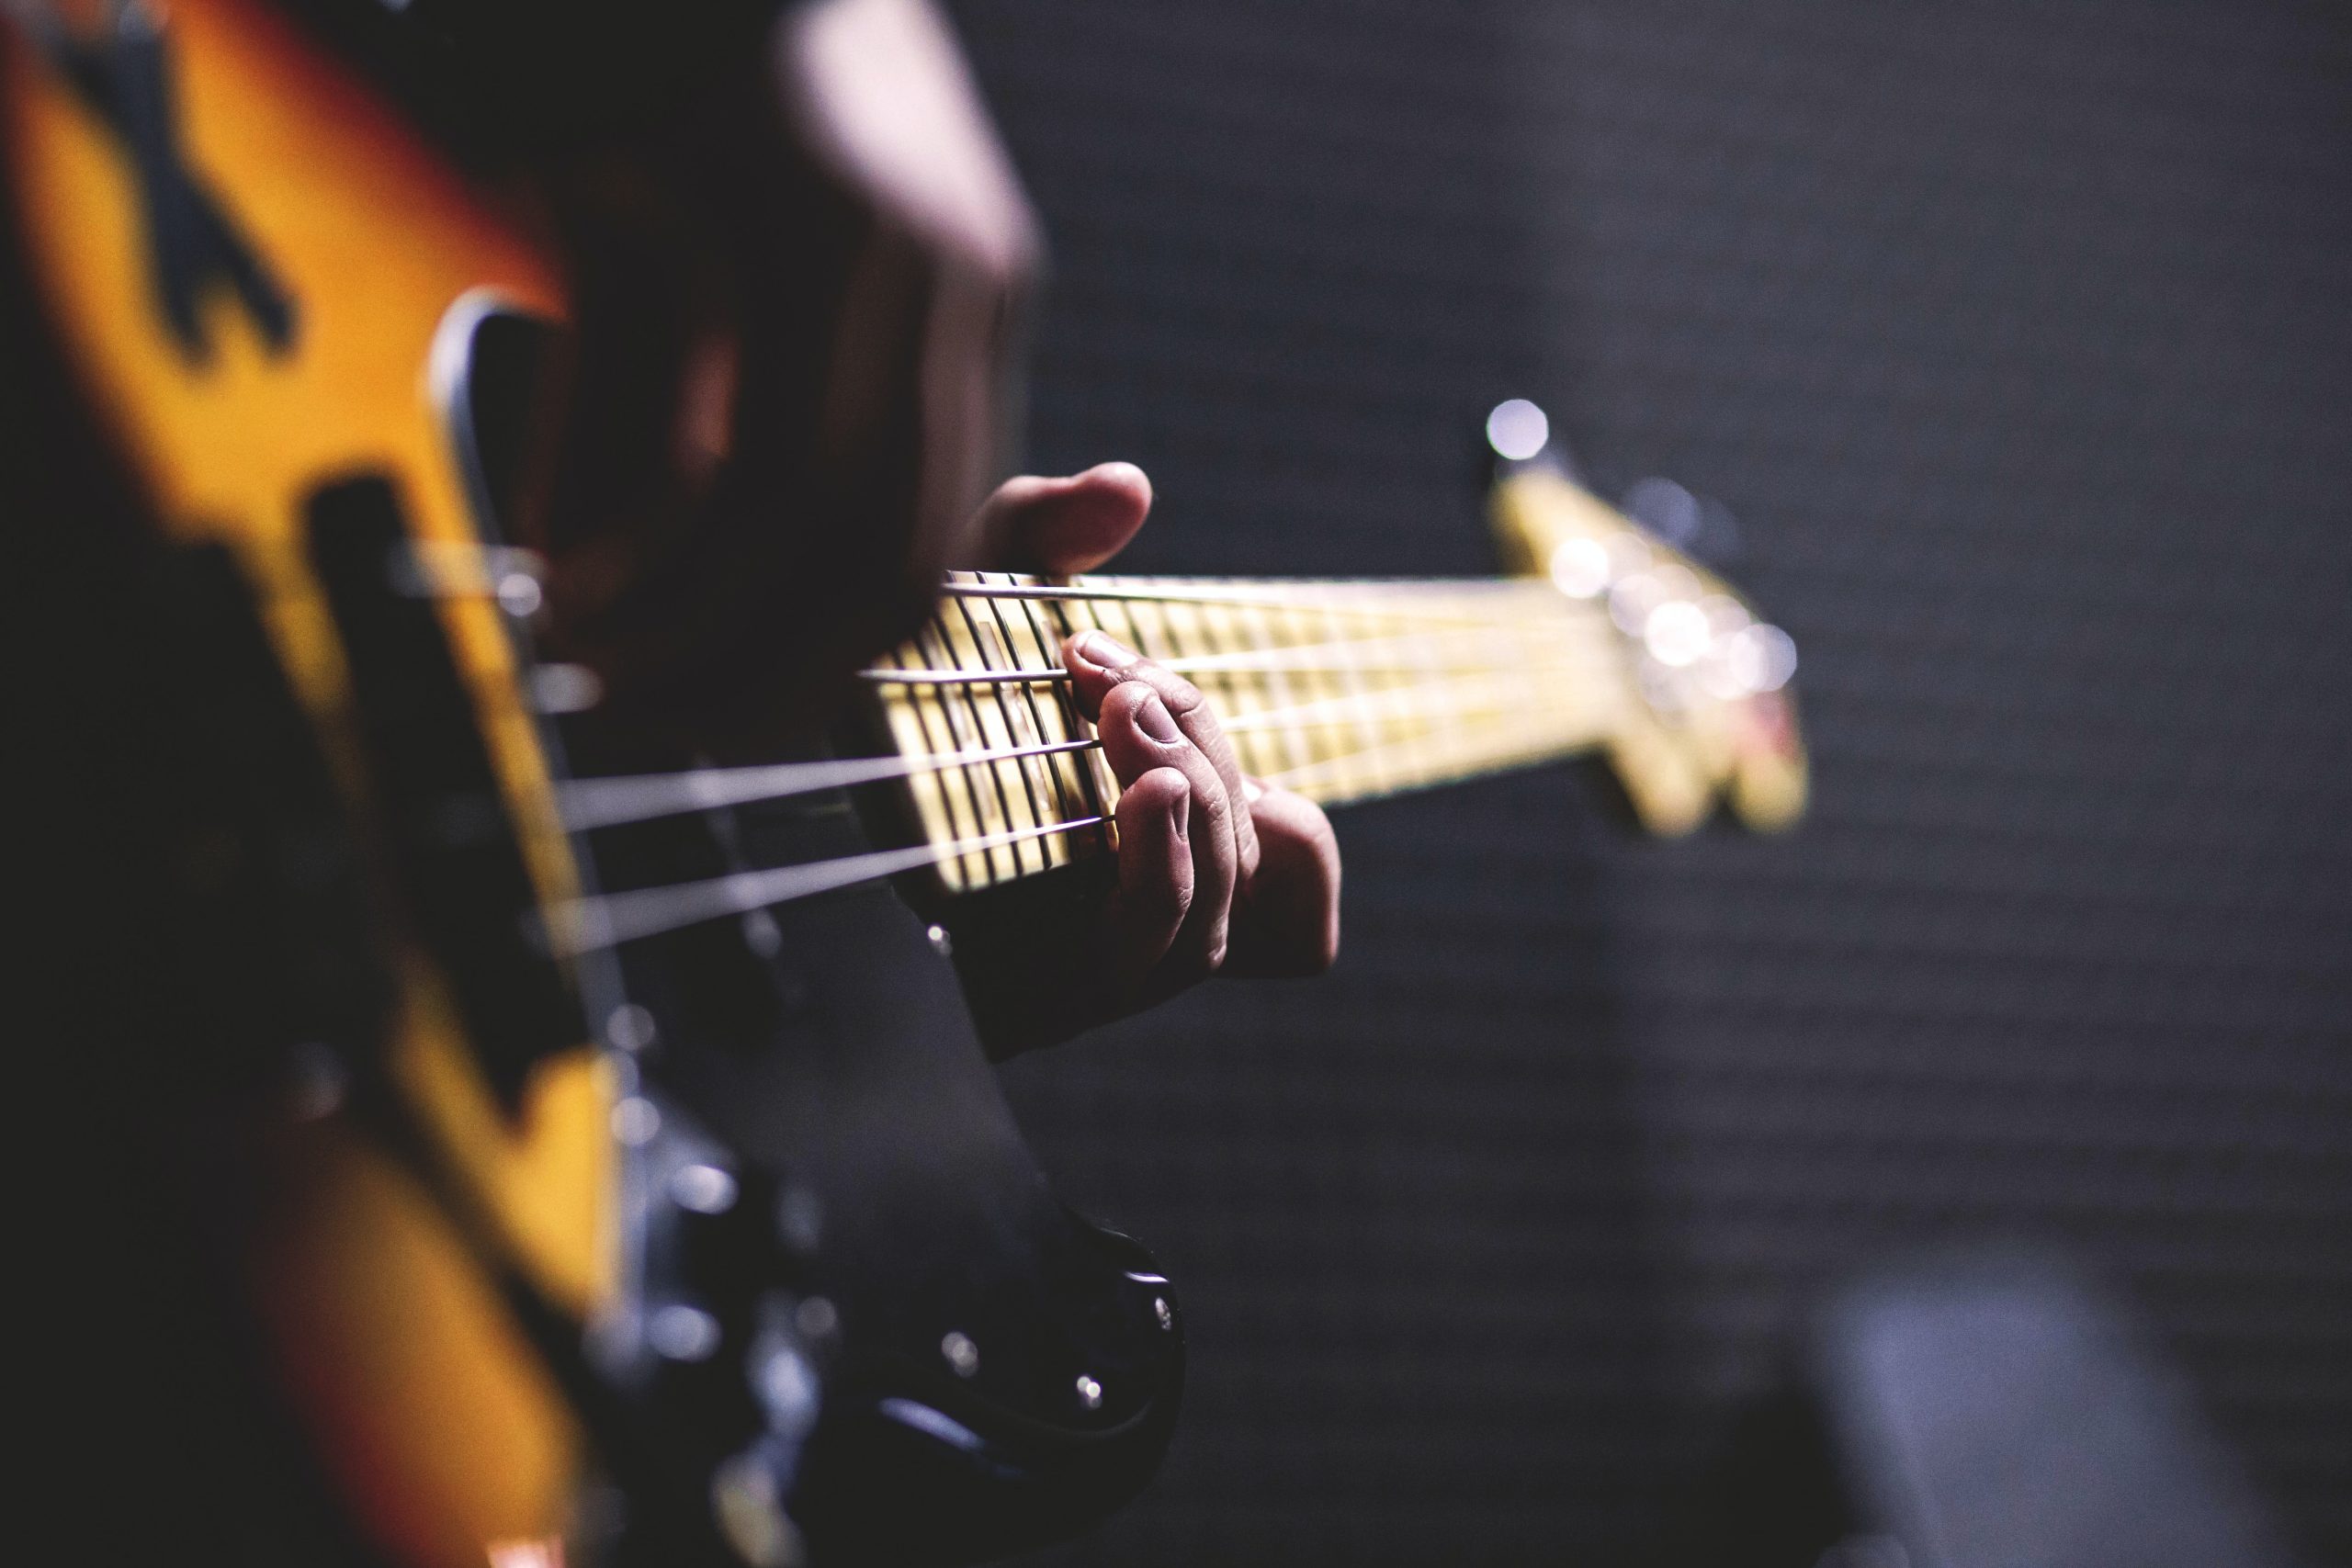 Learning The Notes On A Bass Neck: A Complete Beginner’s Guide